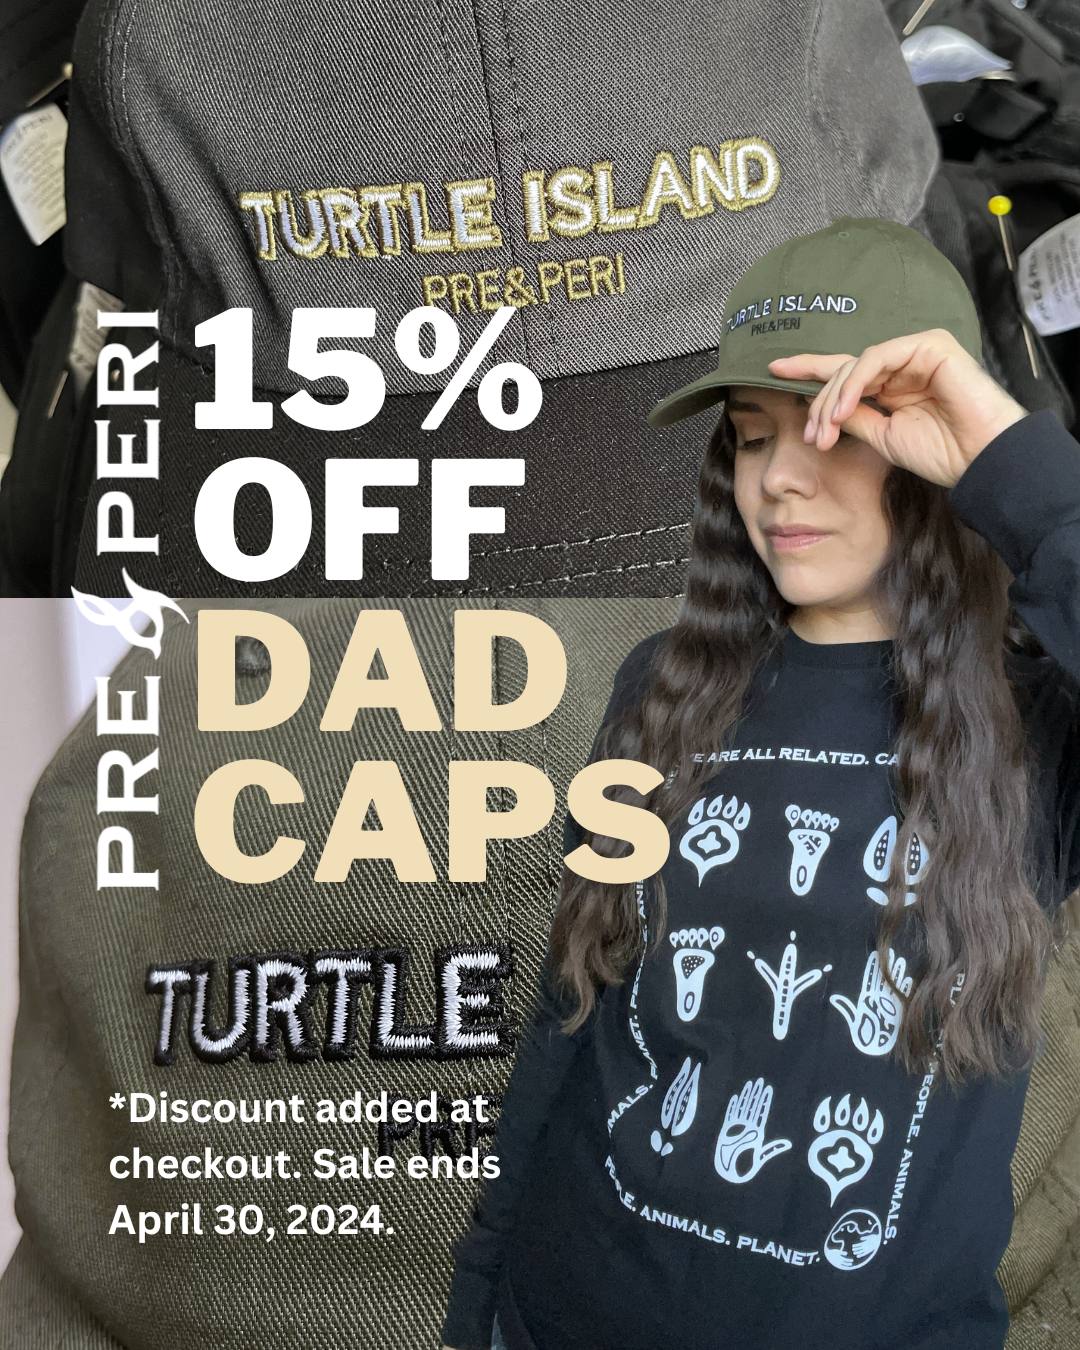 A poster for 15% off Turtle Island Dad Caps from Pre&Peri. Discount added at checkout. Sale ends April 30, 2024.